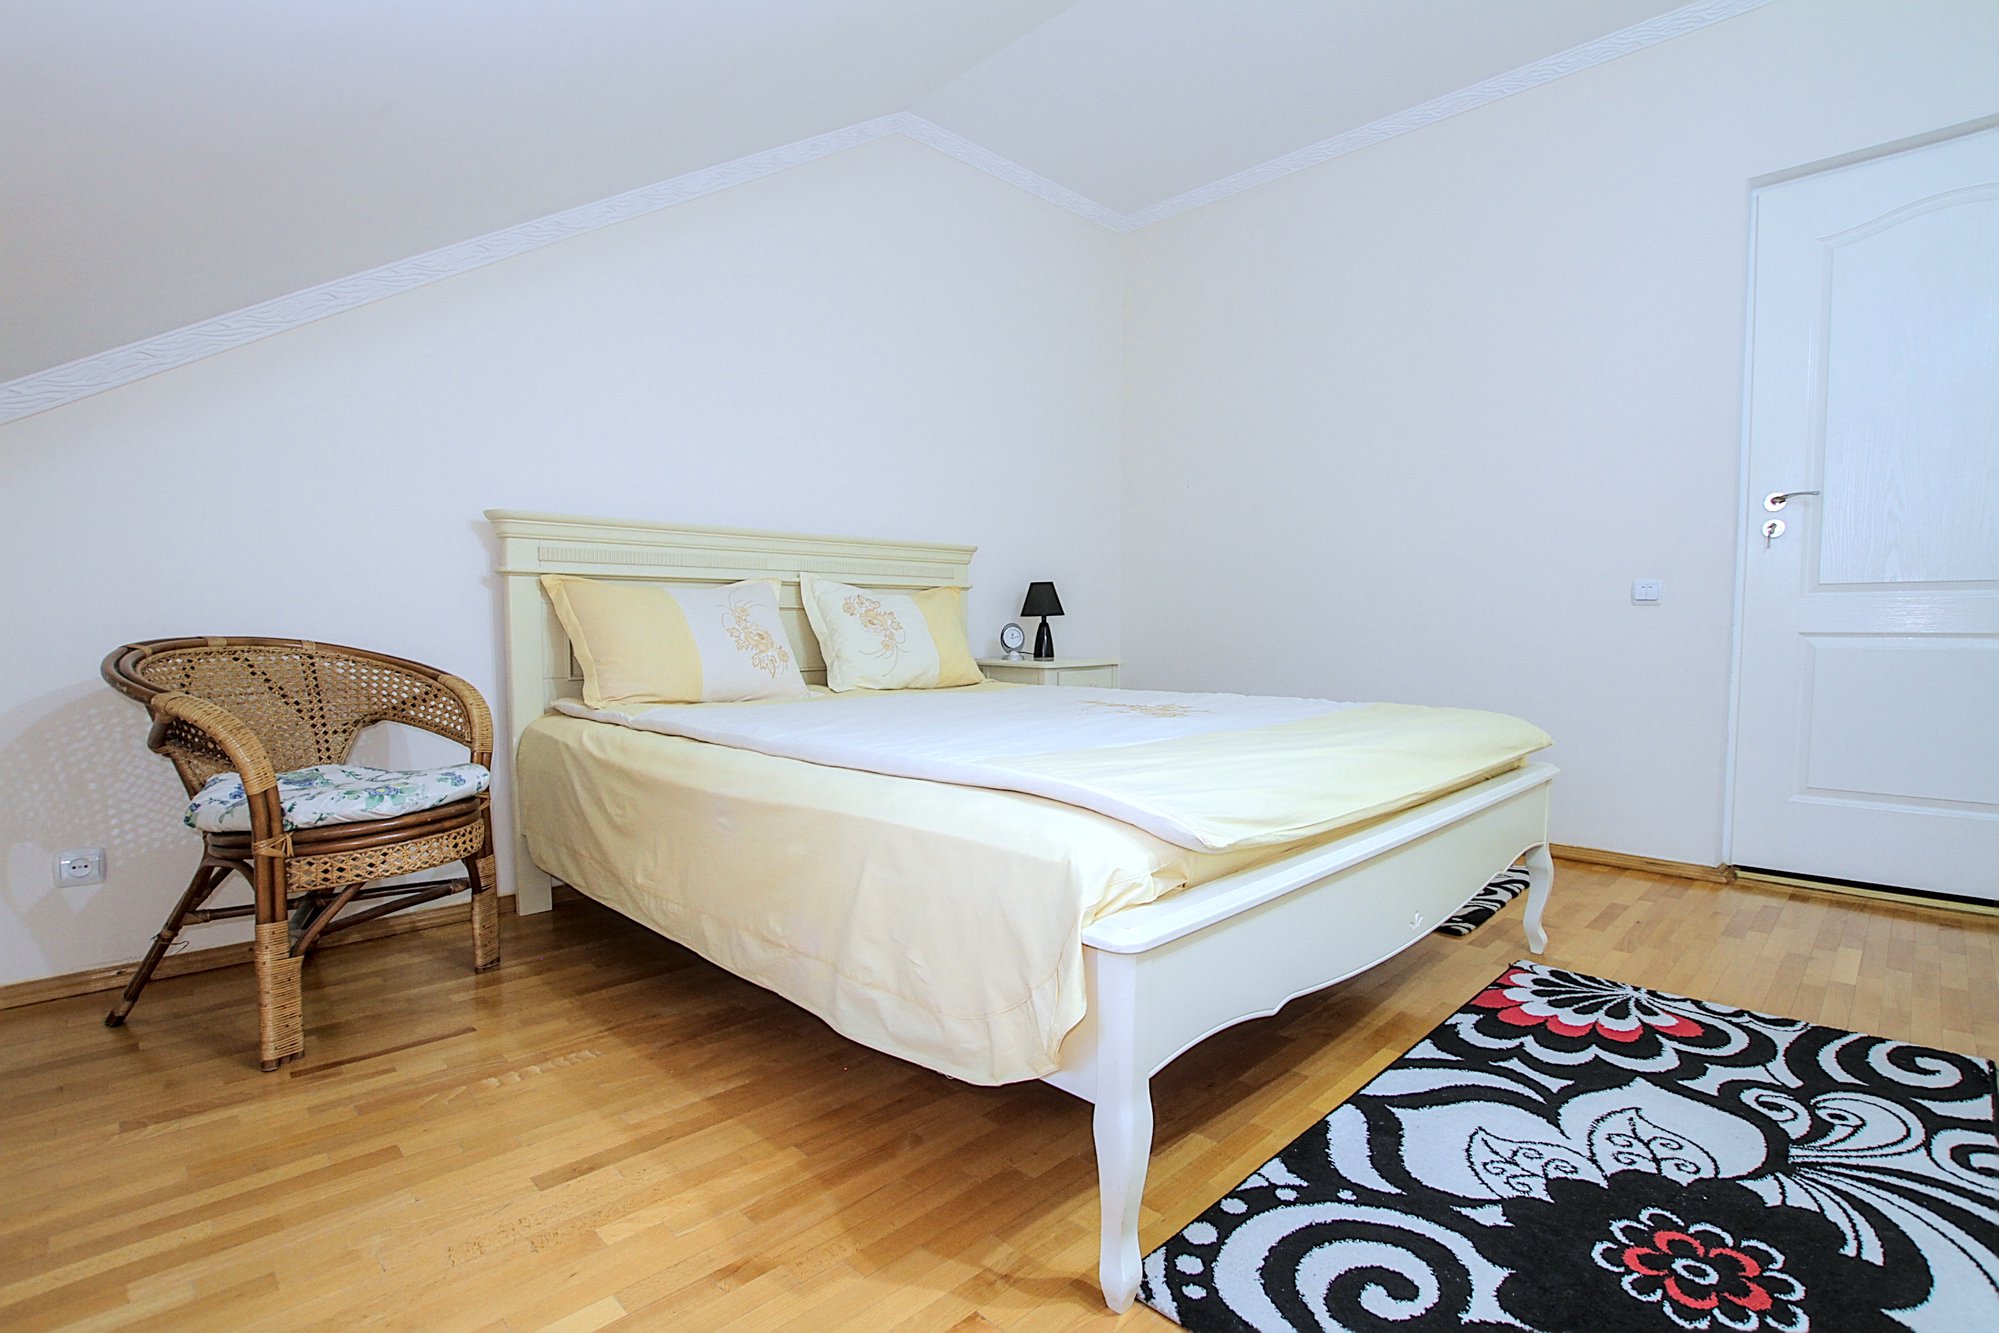 Large Central Apartment is a 3 rooms apartment for rent in Chisinau, Moldova